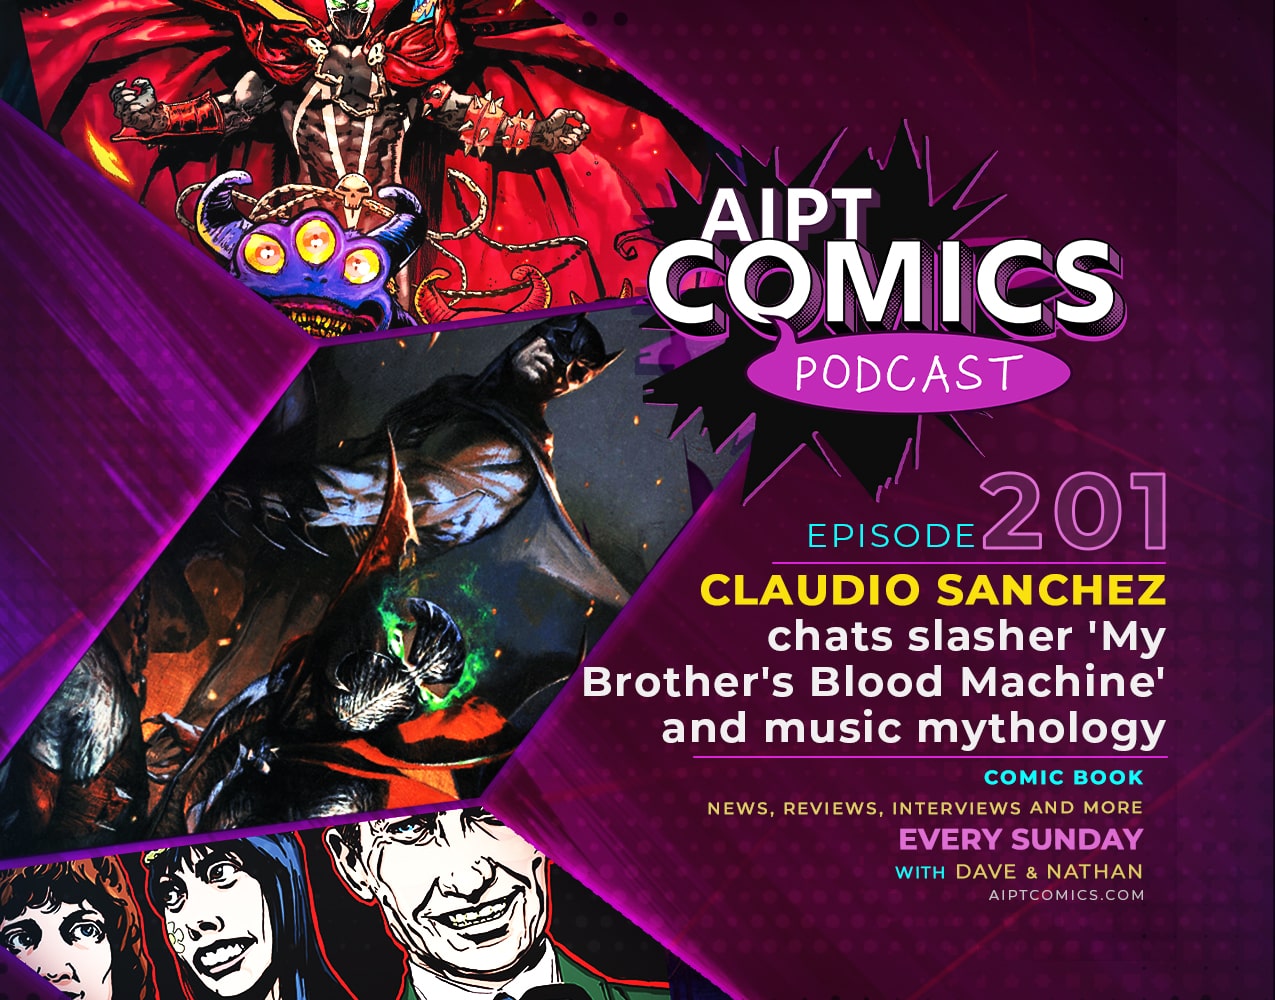 AIPT Comics Podcast episode 201: Claudio Sanchez chats slasher 'My Brother's Blood Machine' and music mythology